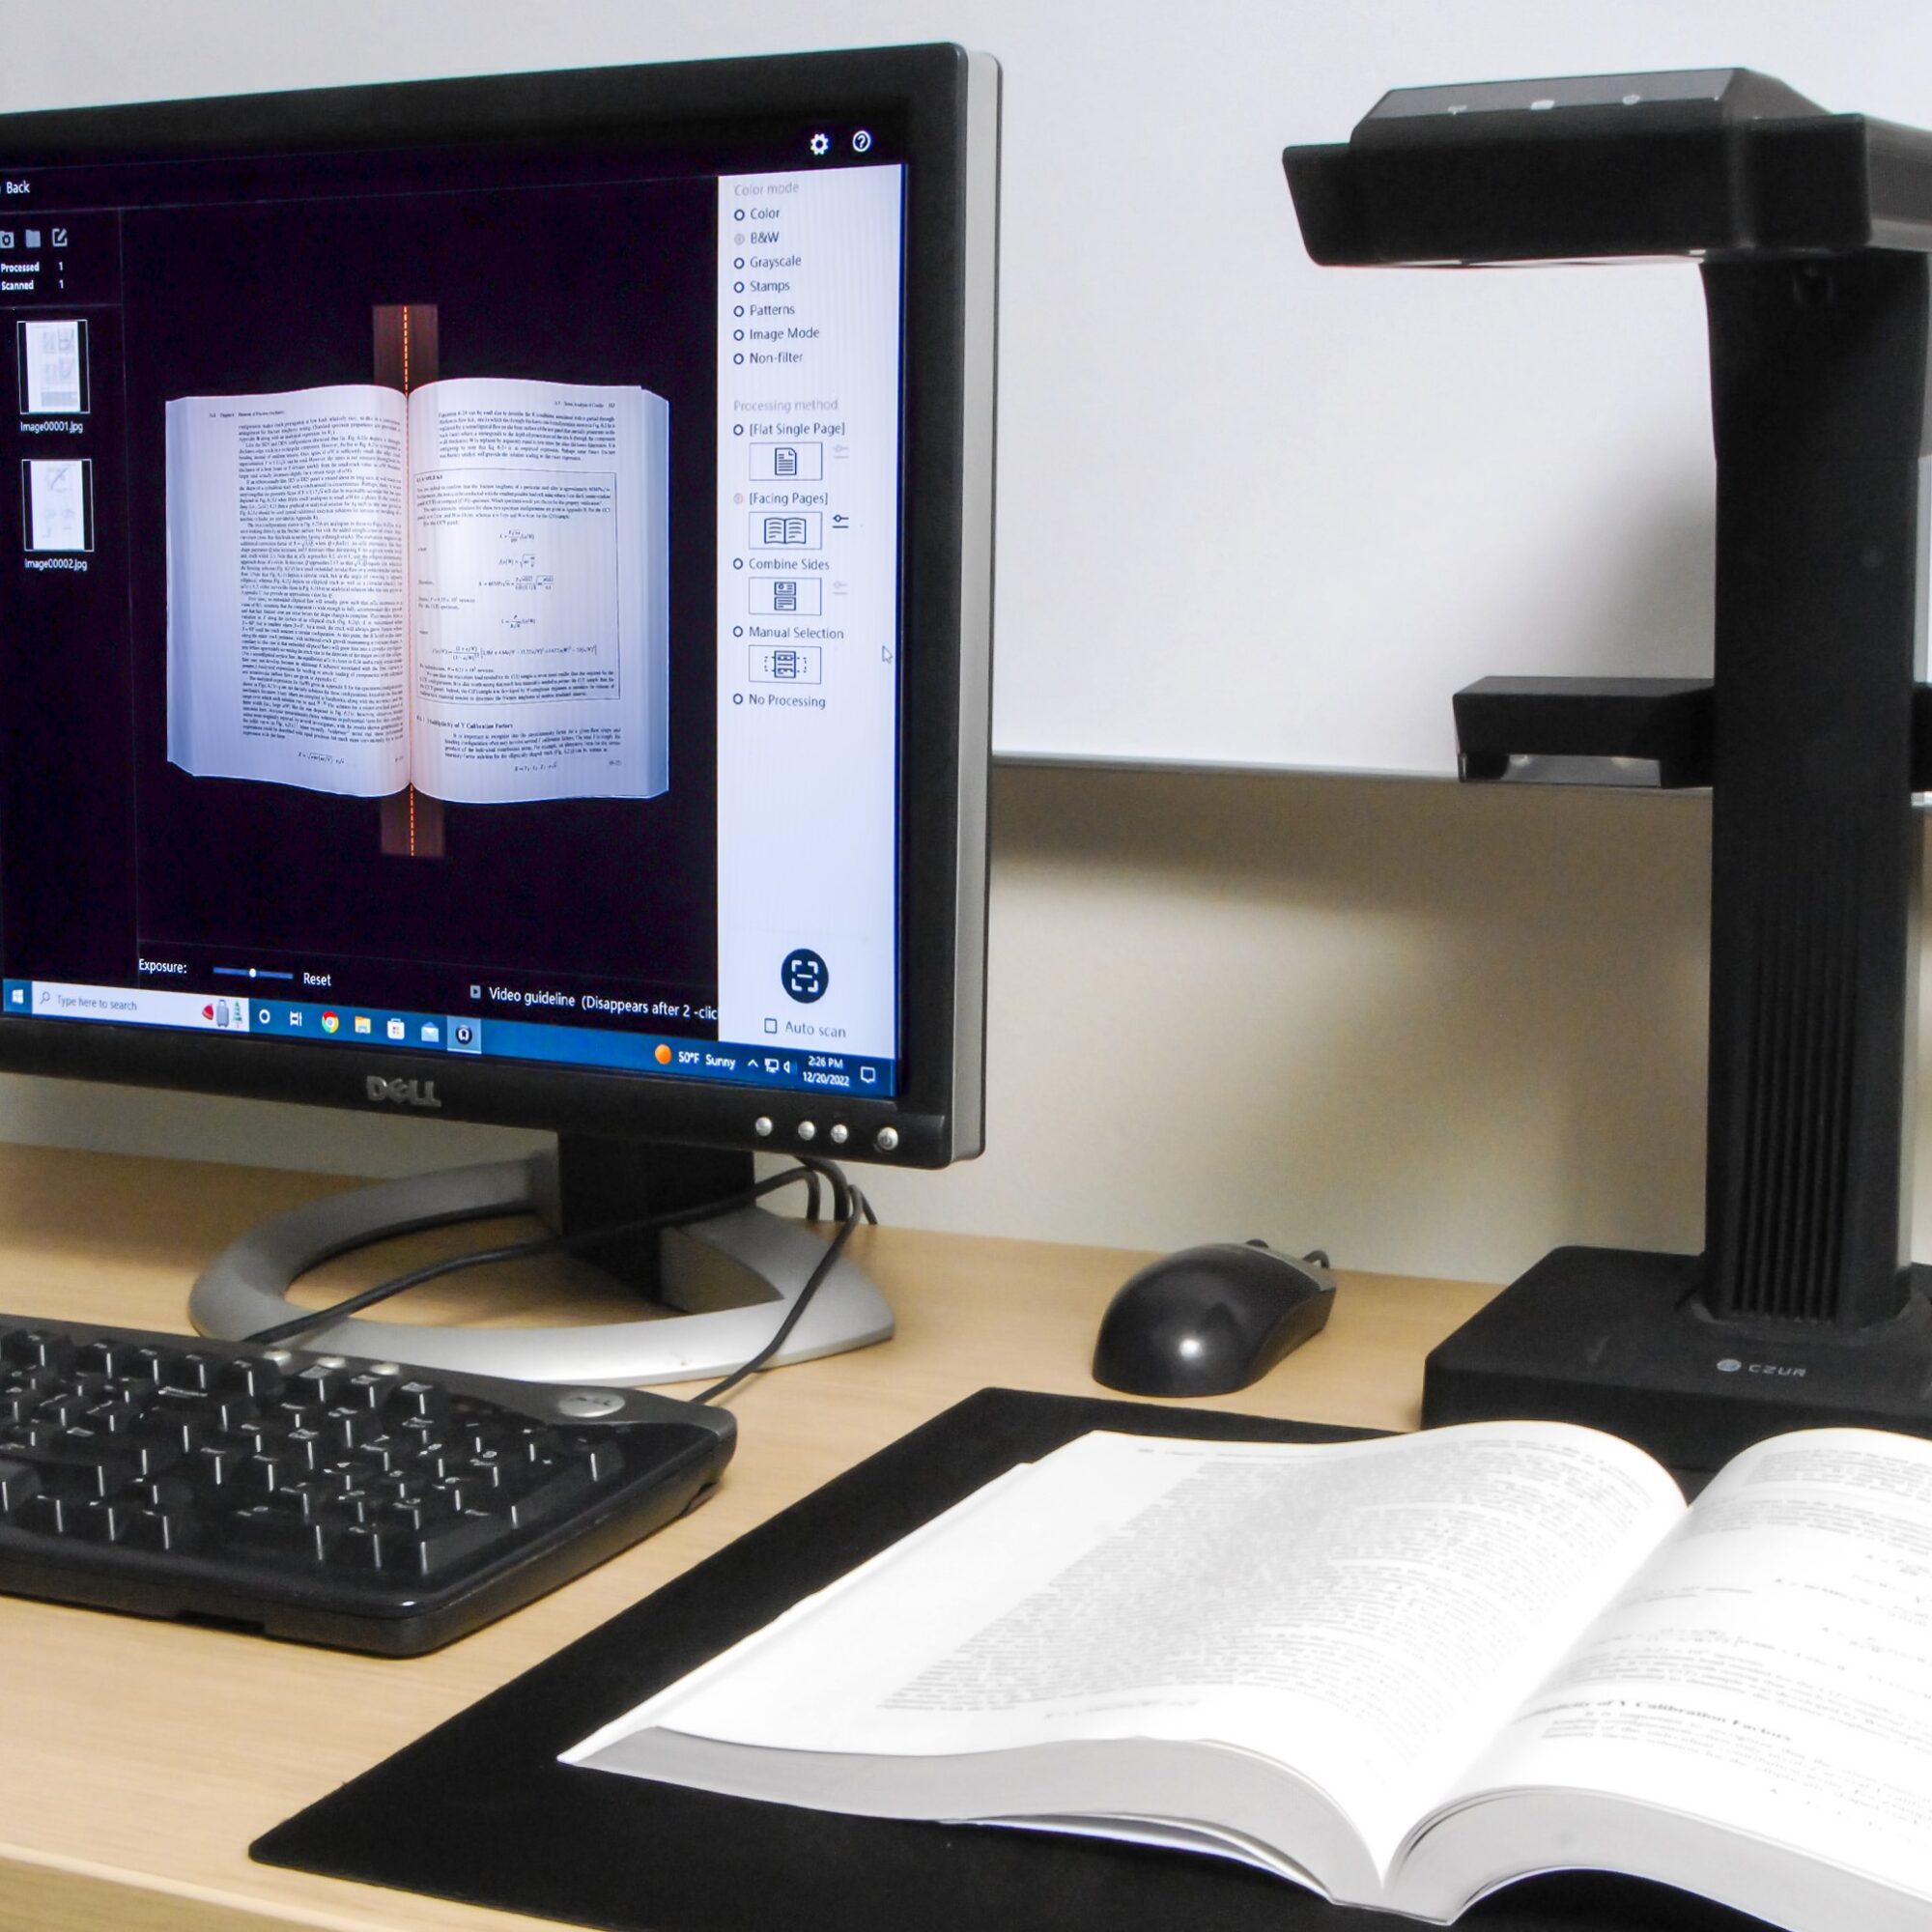 A book lays open on a desk with a black scanner positioned above it. To the left is a computer mouse, keyboard and a monitor displaying an image of the book being scanned for digitization.